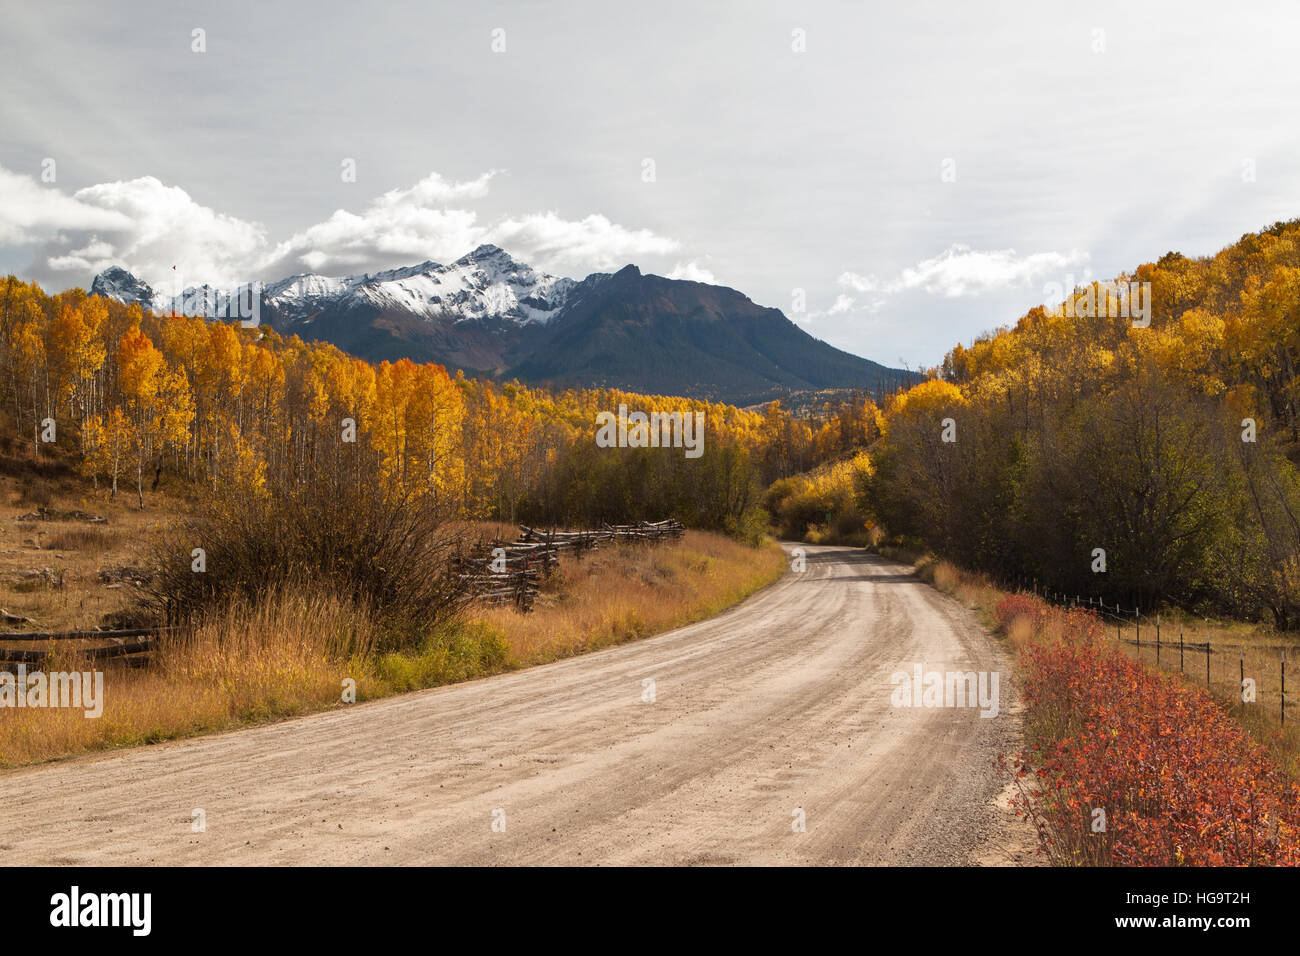 A country road winds into the Colorado mountains near the Dallas Divide on an autumn day. Stock Photo